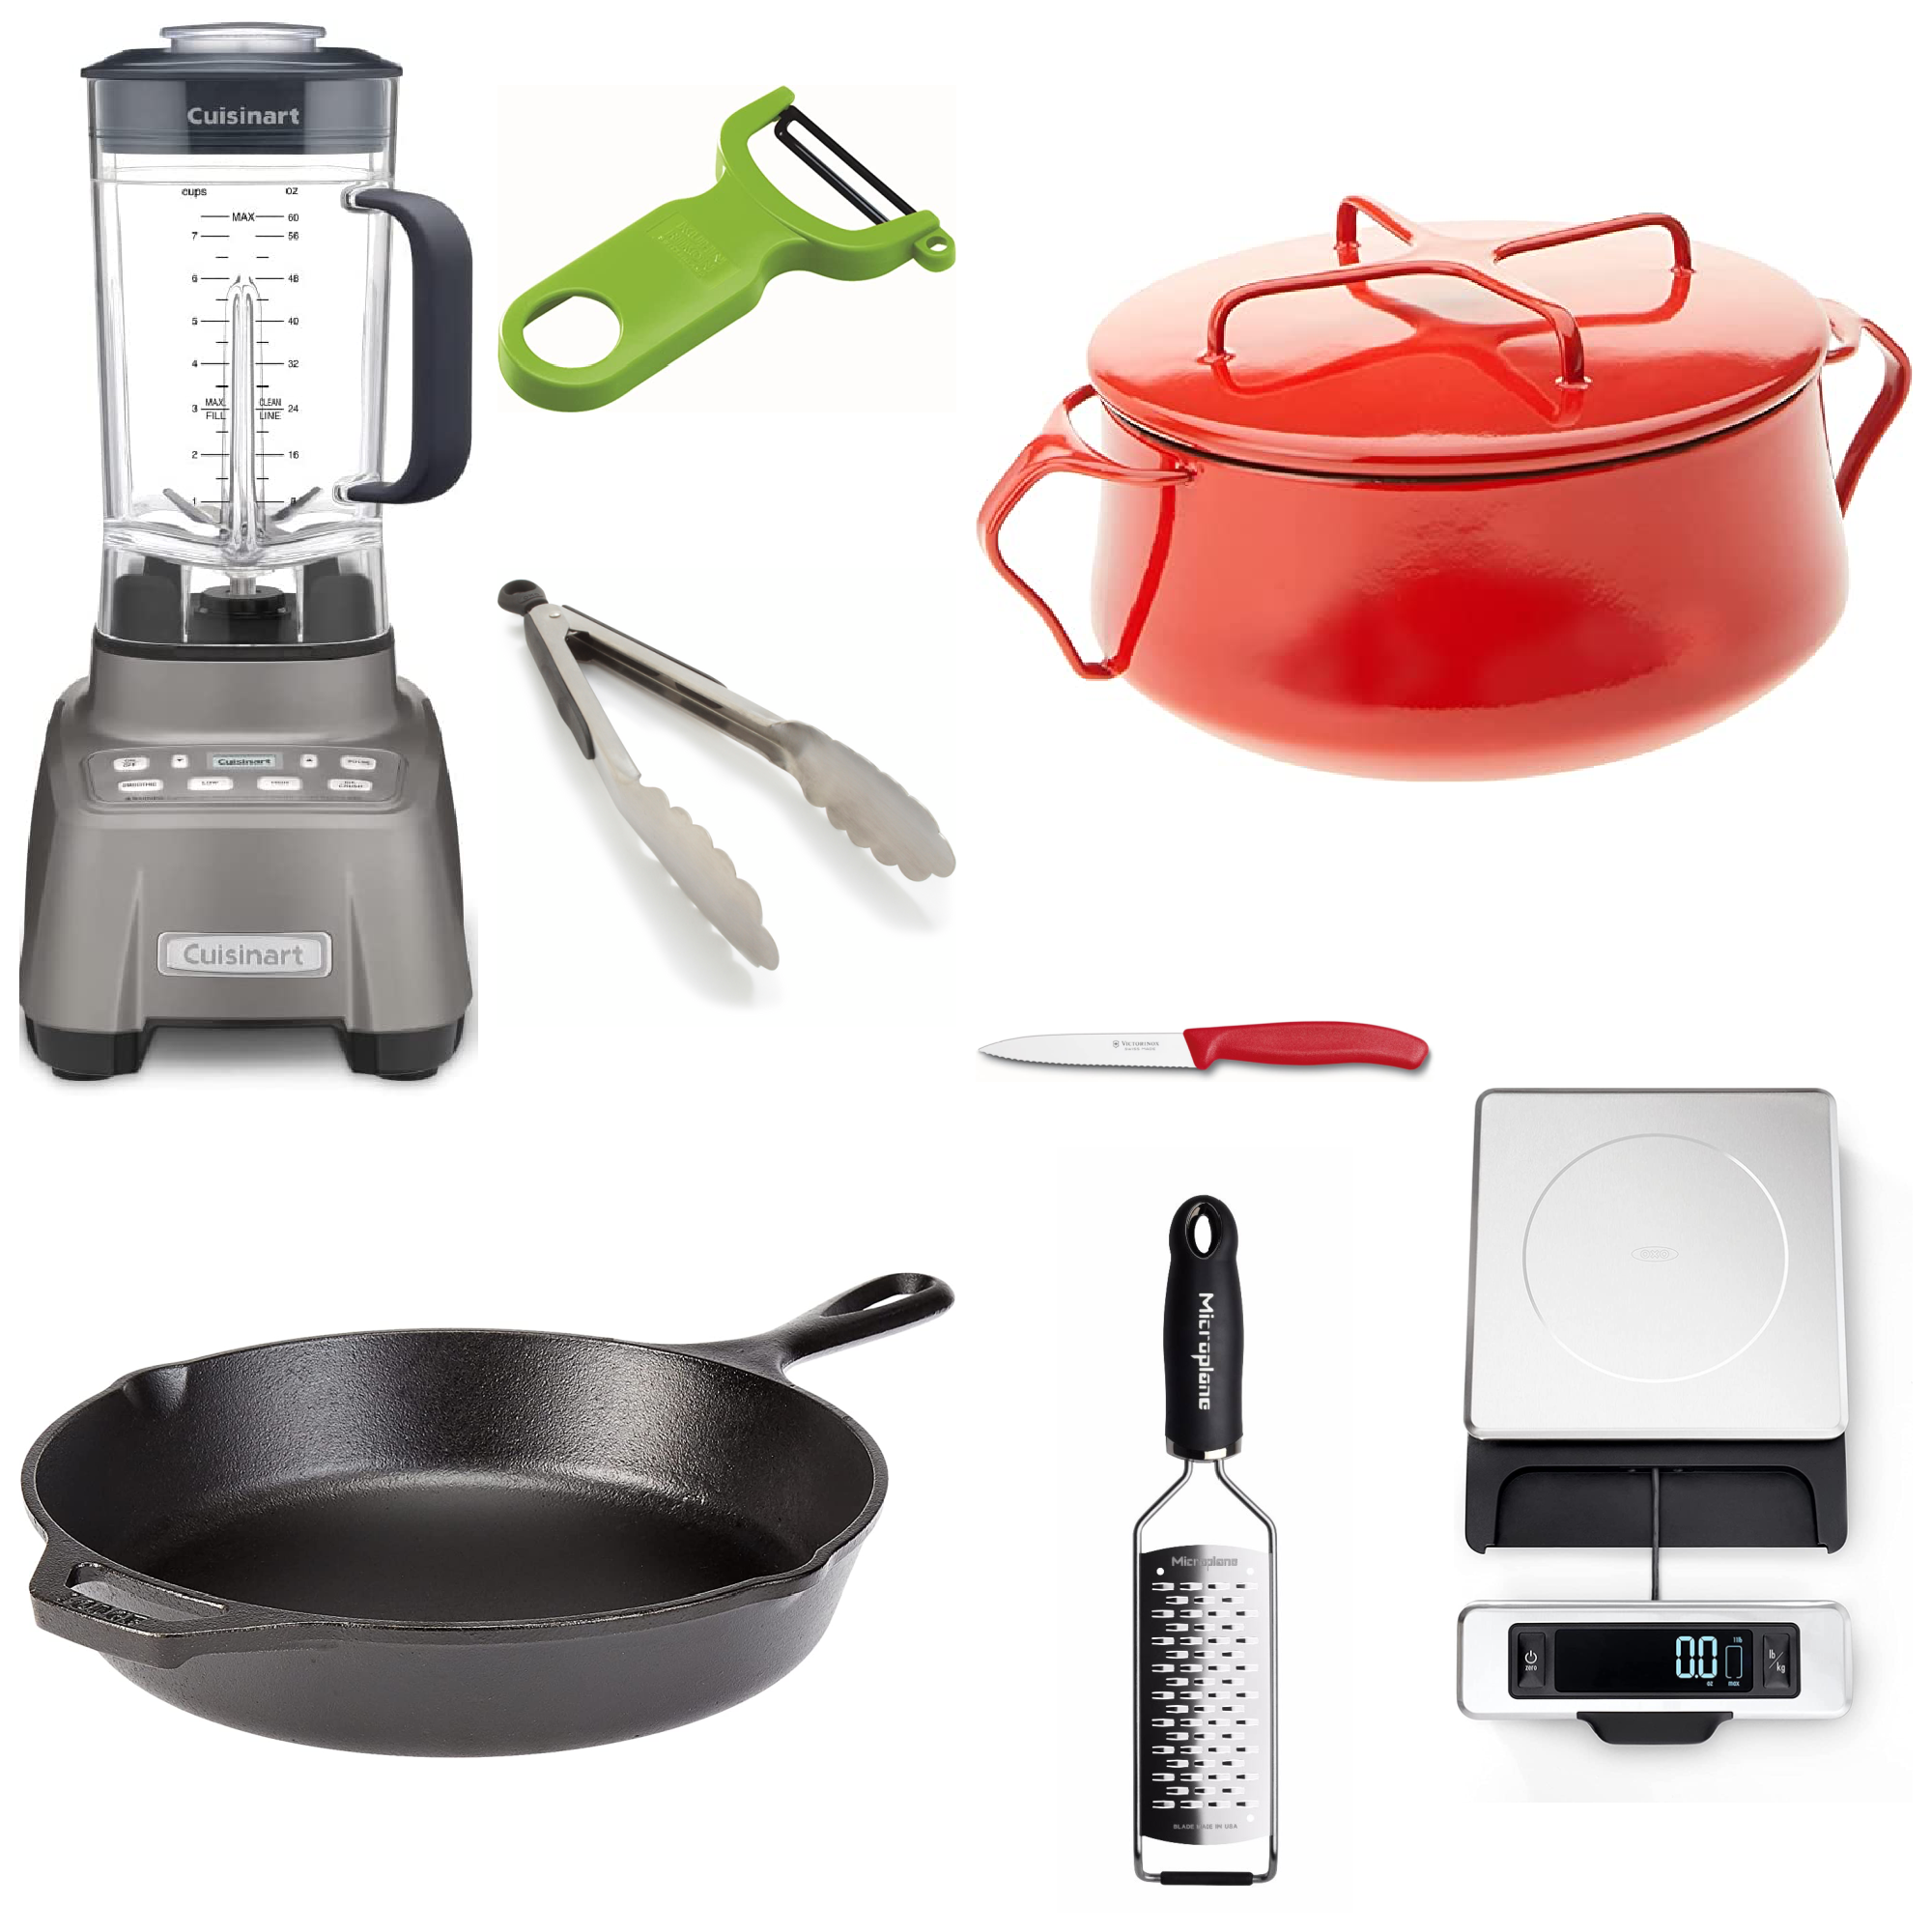 My Mom Loves These 9 Kitchen Tools and Accessories